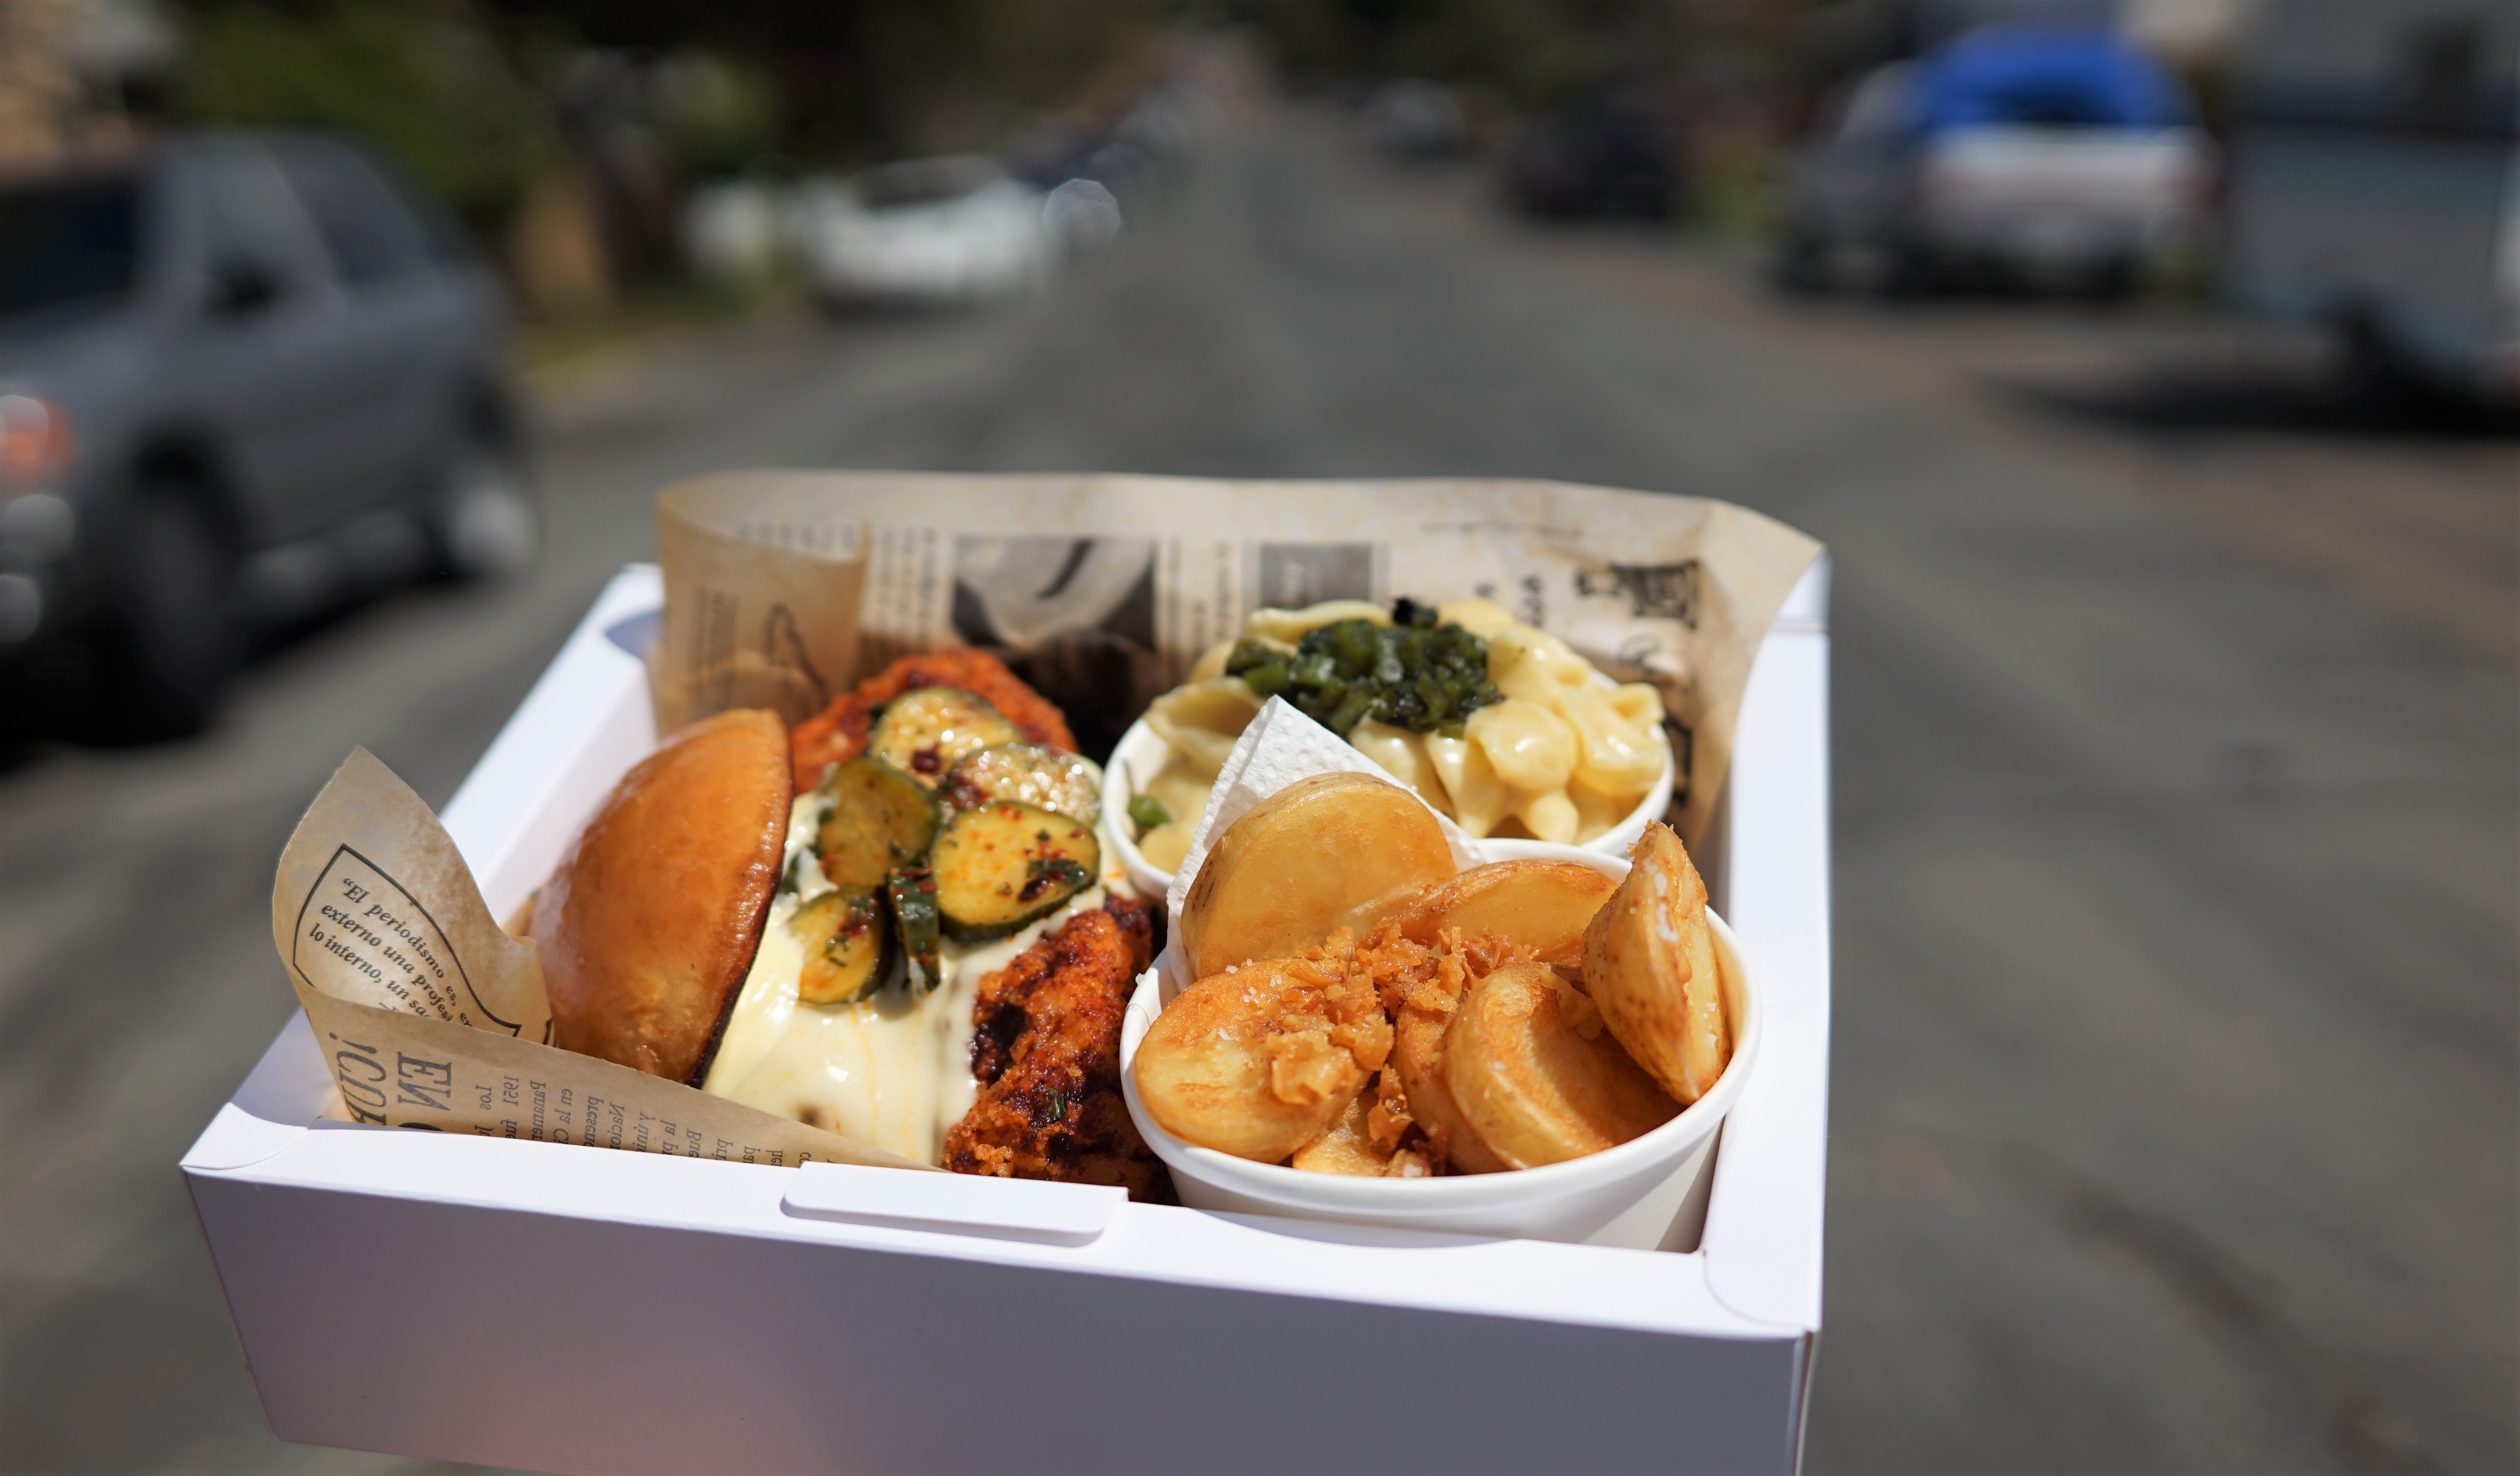 A box holding a fried chicken sandwich and sides.